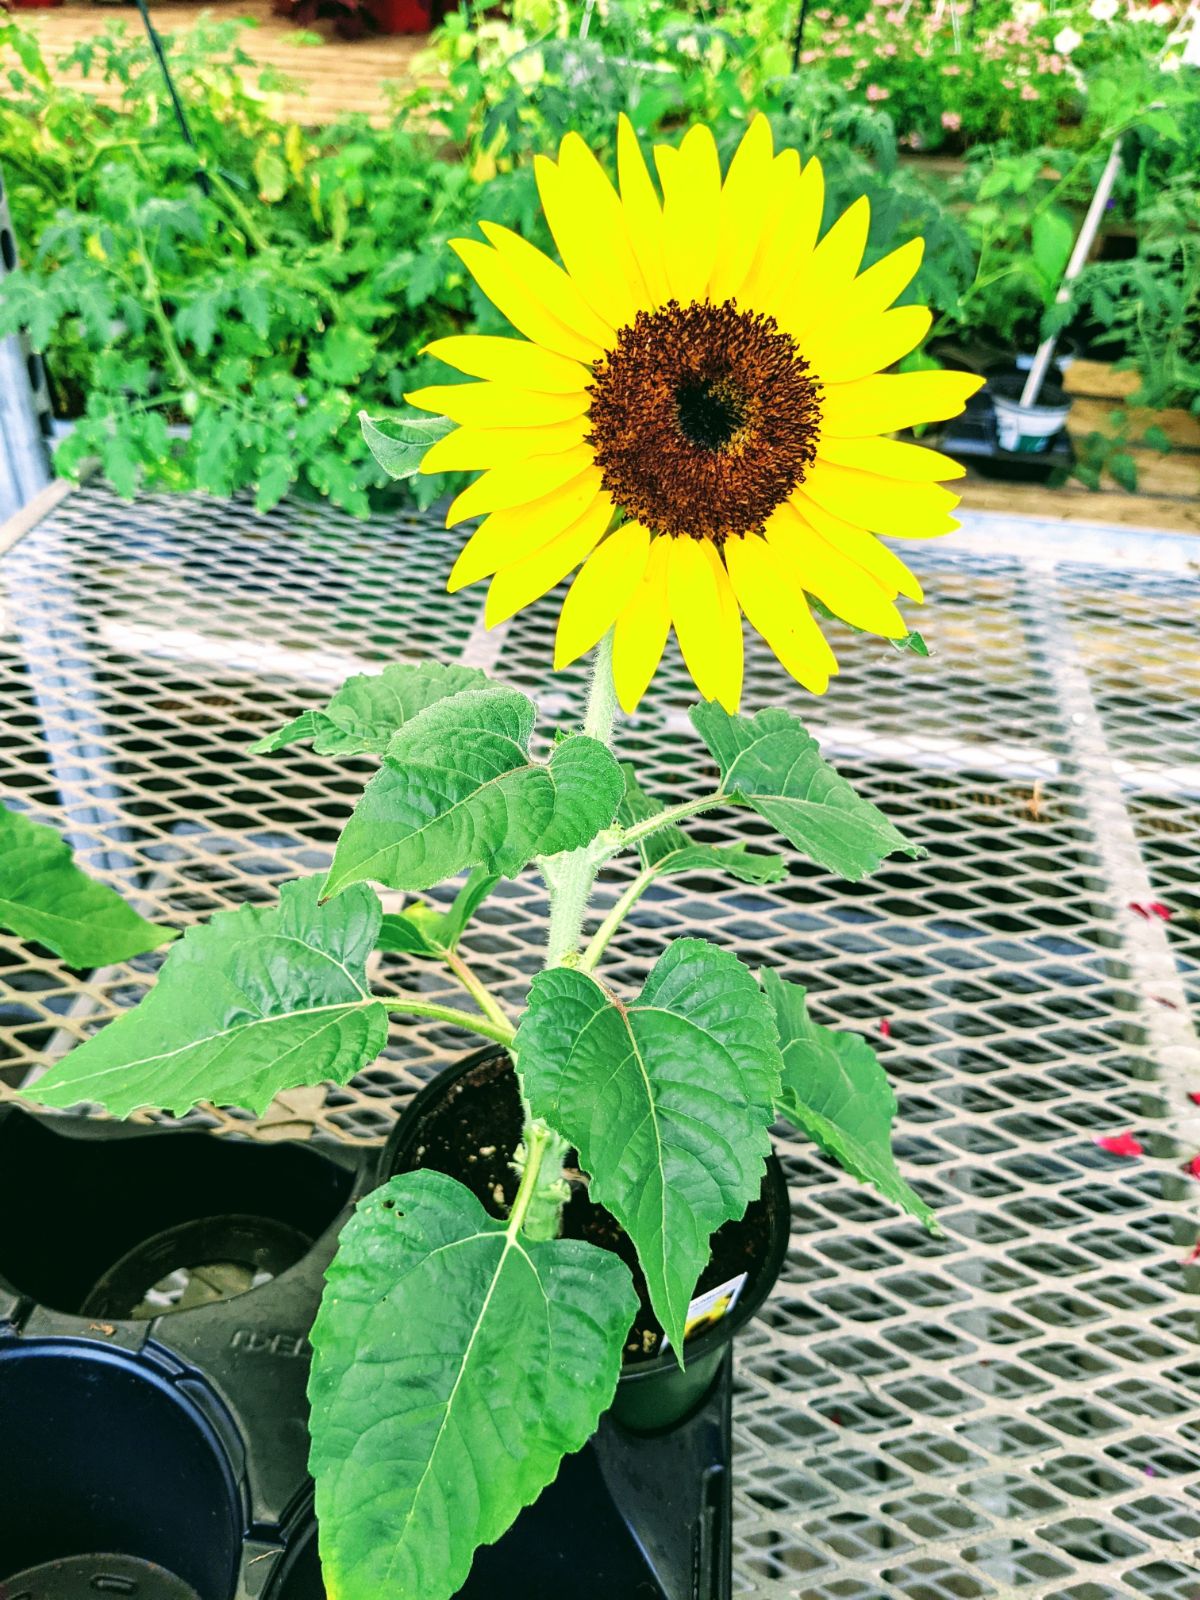 Single small sunflower with sunny yellow petals